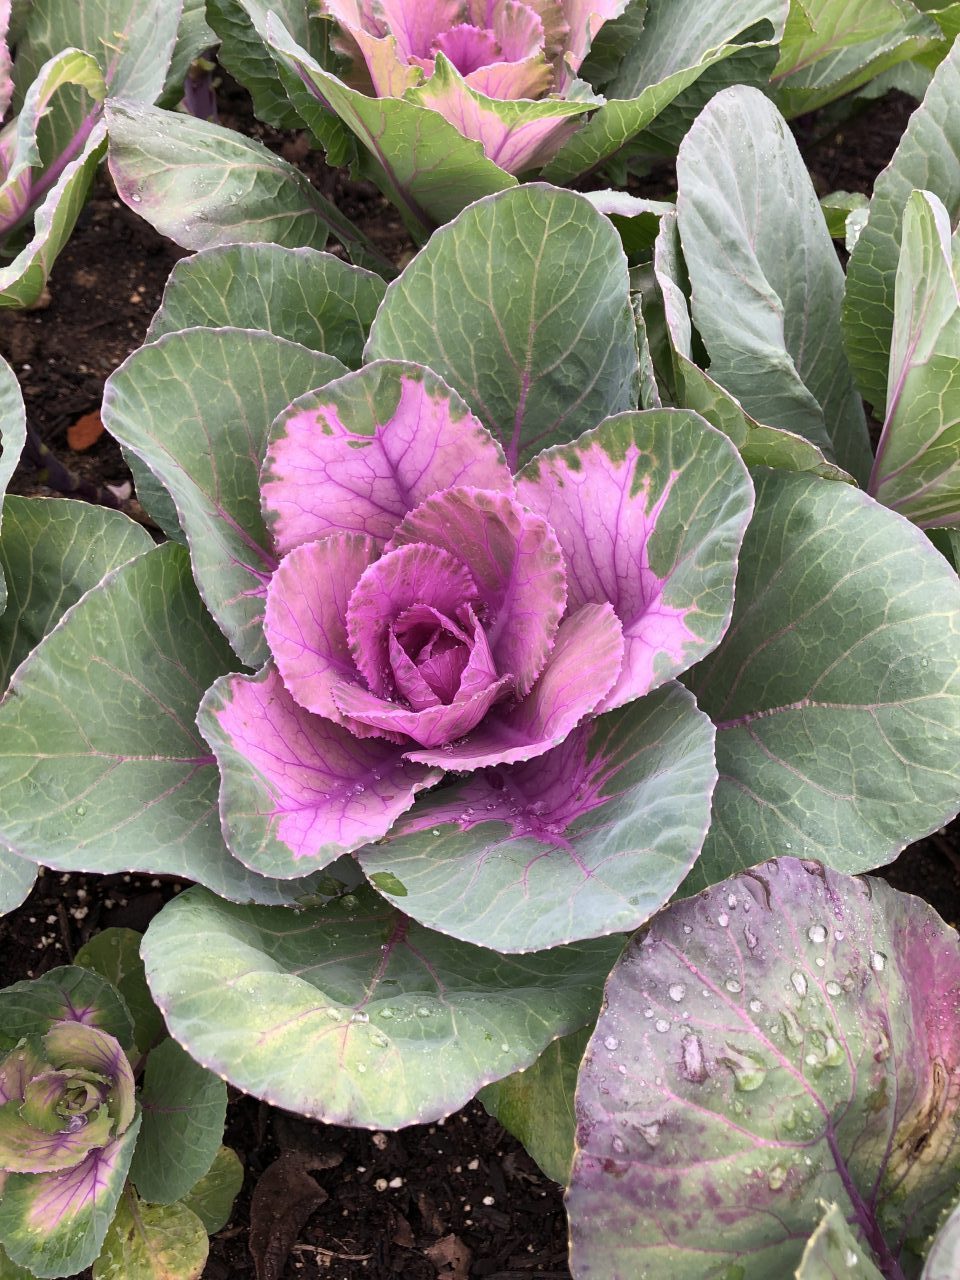 Flowering Cabbage & Kale, Another Winter Treasure! - Gill Landscape Nursery